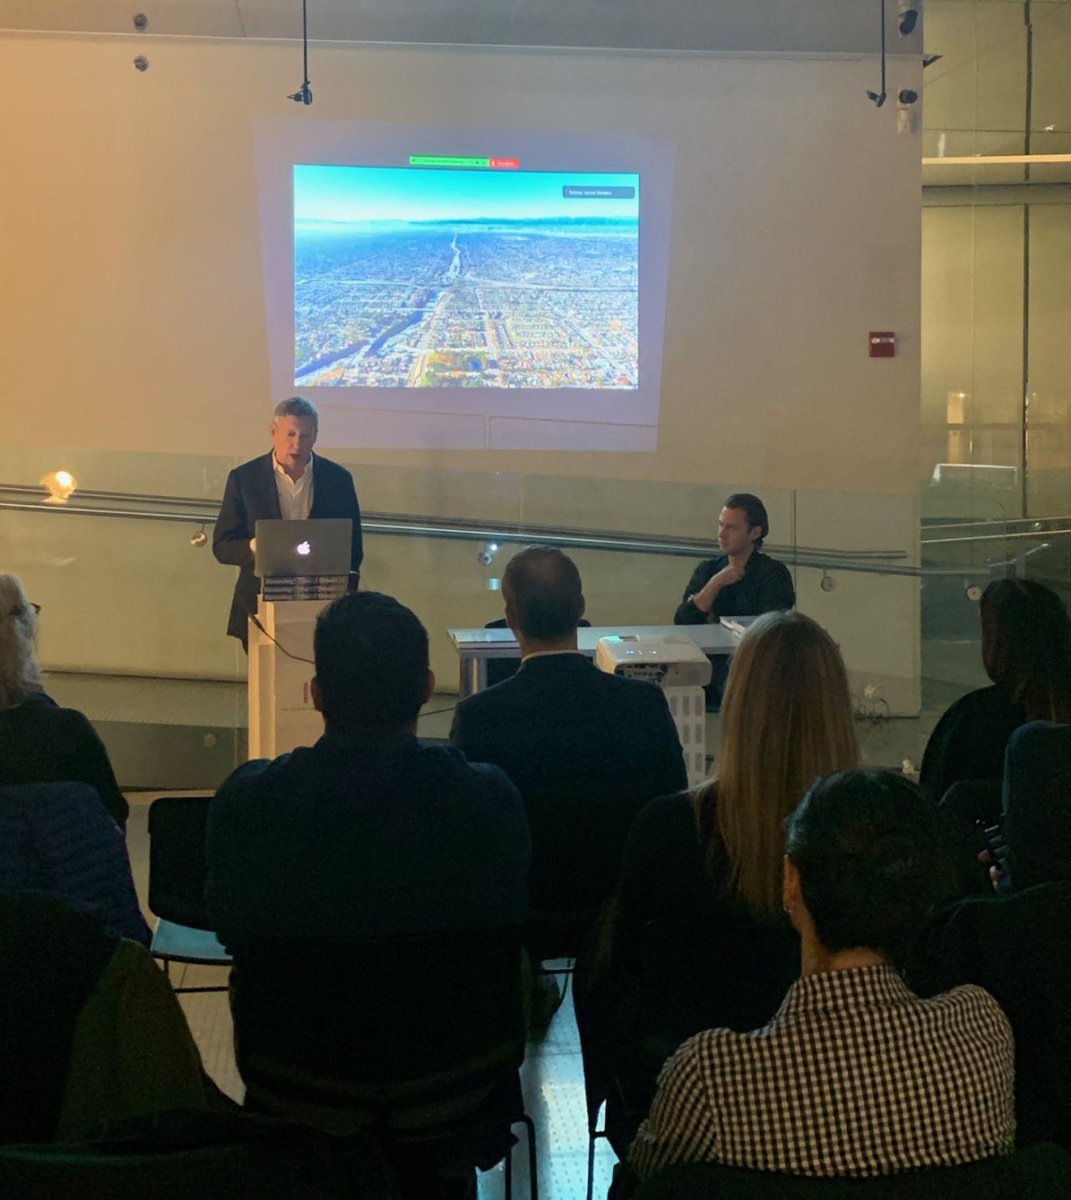 Thank you to Carol A. Willis and The Skyscraper Museum for hosting us recently for a conversation with Woods Bagot Regional Design Director Matt Ducharme and editor James Sanders, FAIA, discussing our latest book, #RenewingtheDream. #adapt #pumptoplug #rechargela